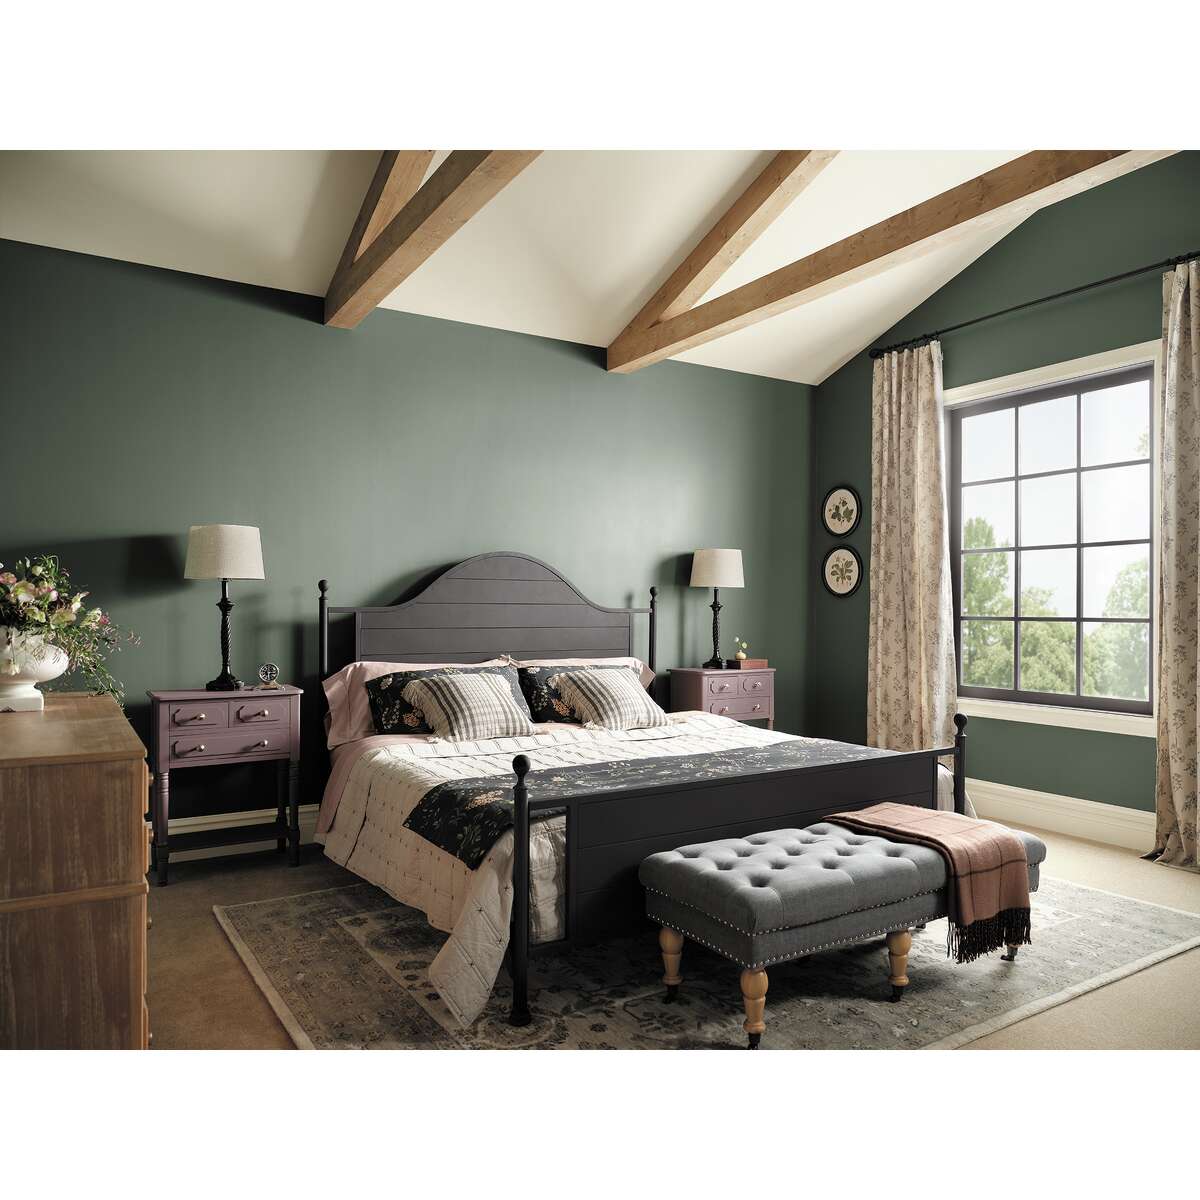 HGTV Home by Sherwin-Willliams' Pewter Green is shown in a bedroom.